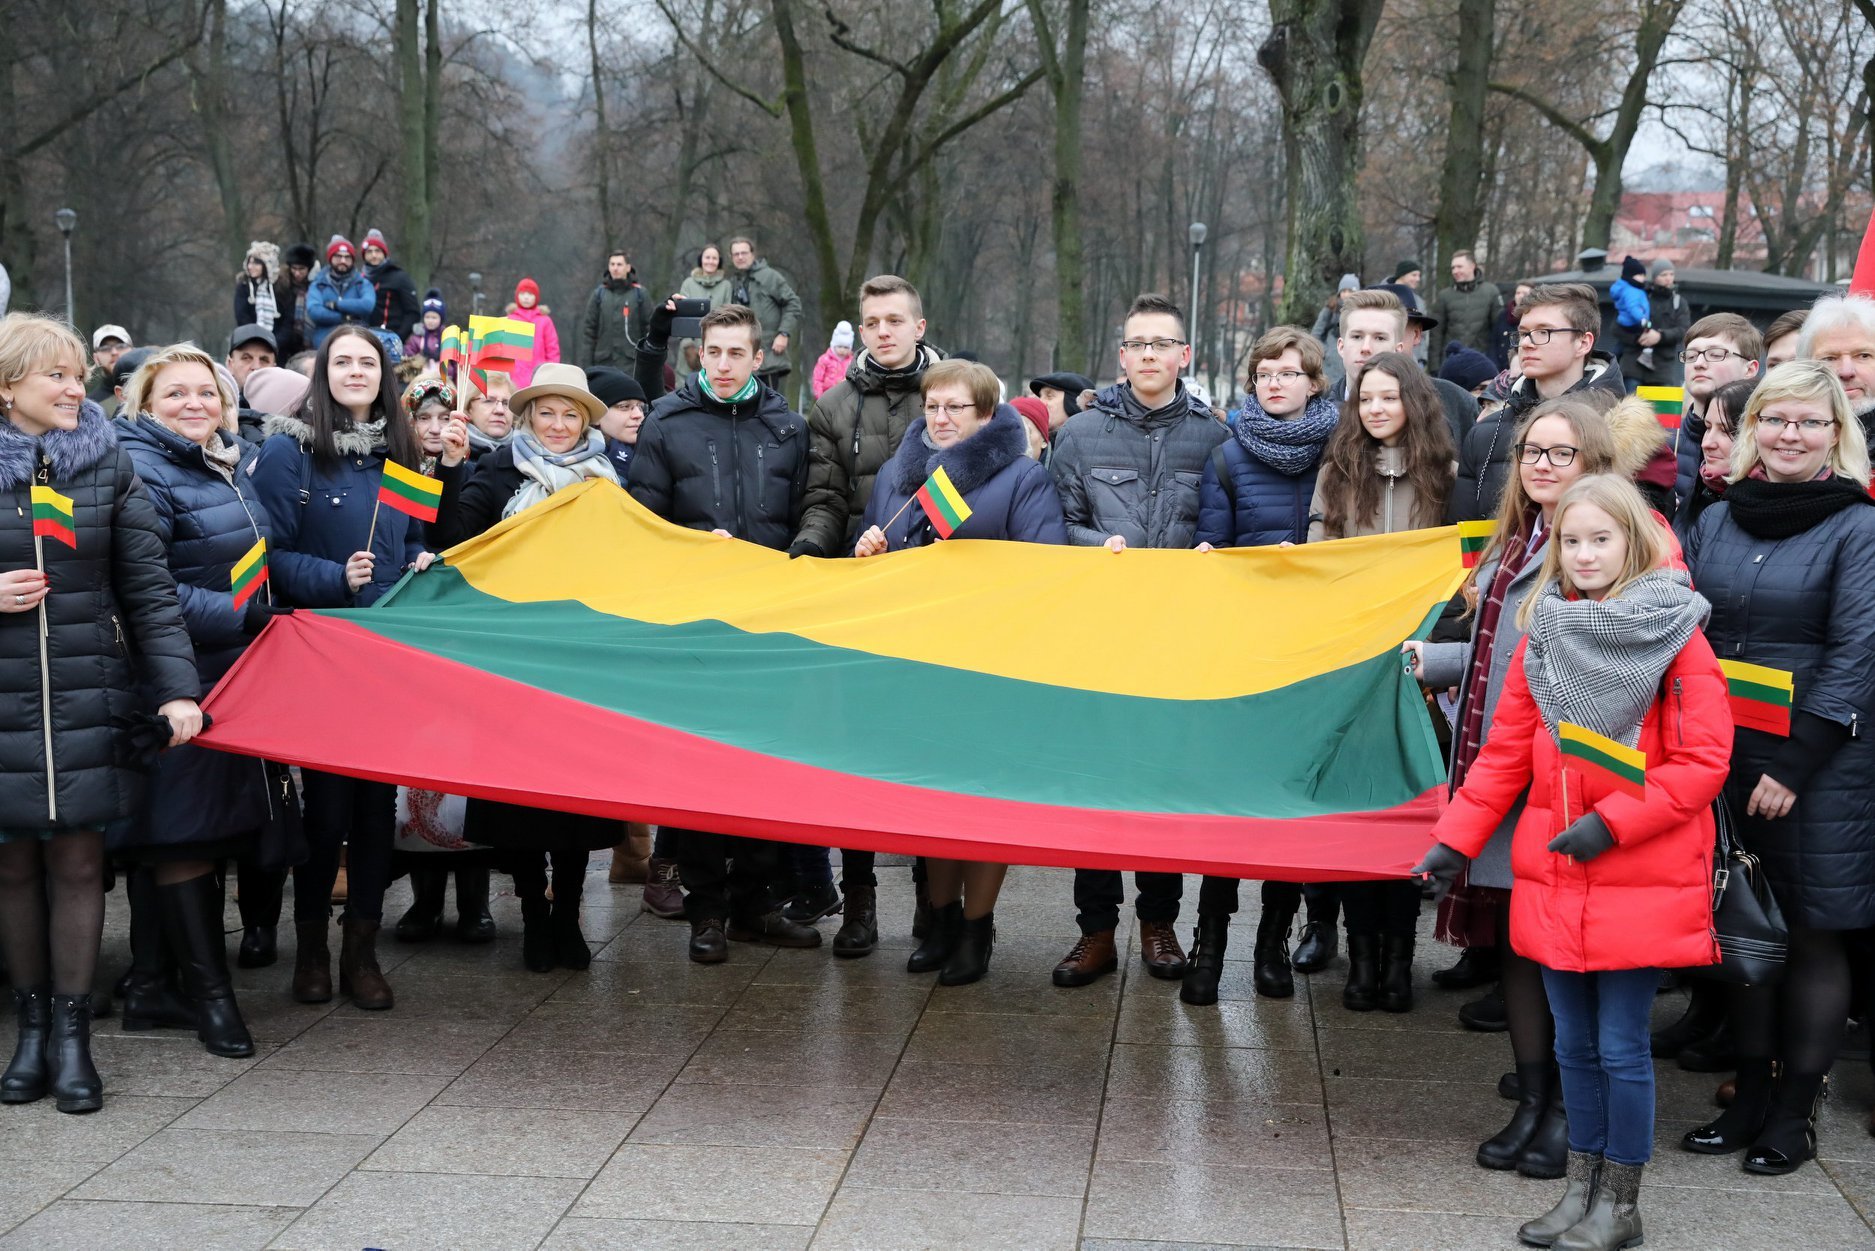 The Lithuanian flag of 2018 was raised in the tower of Gediminas Castle